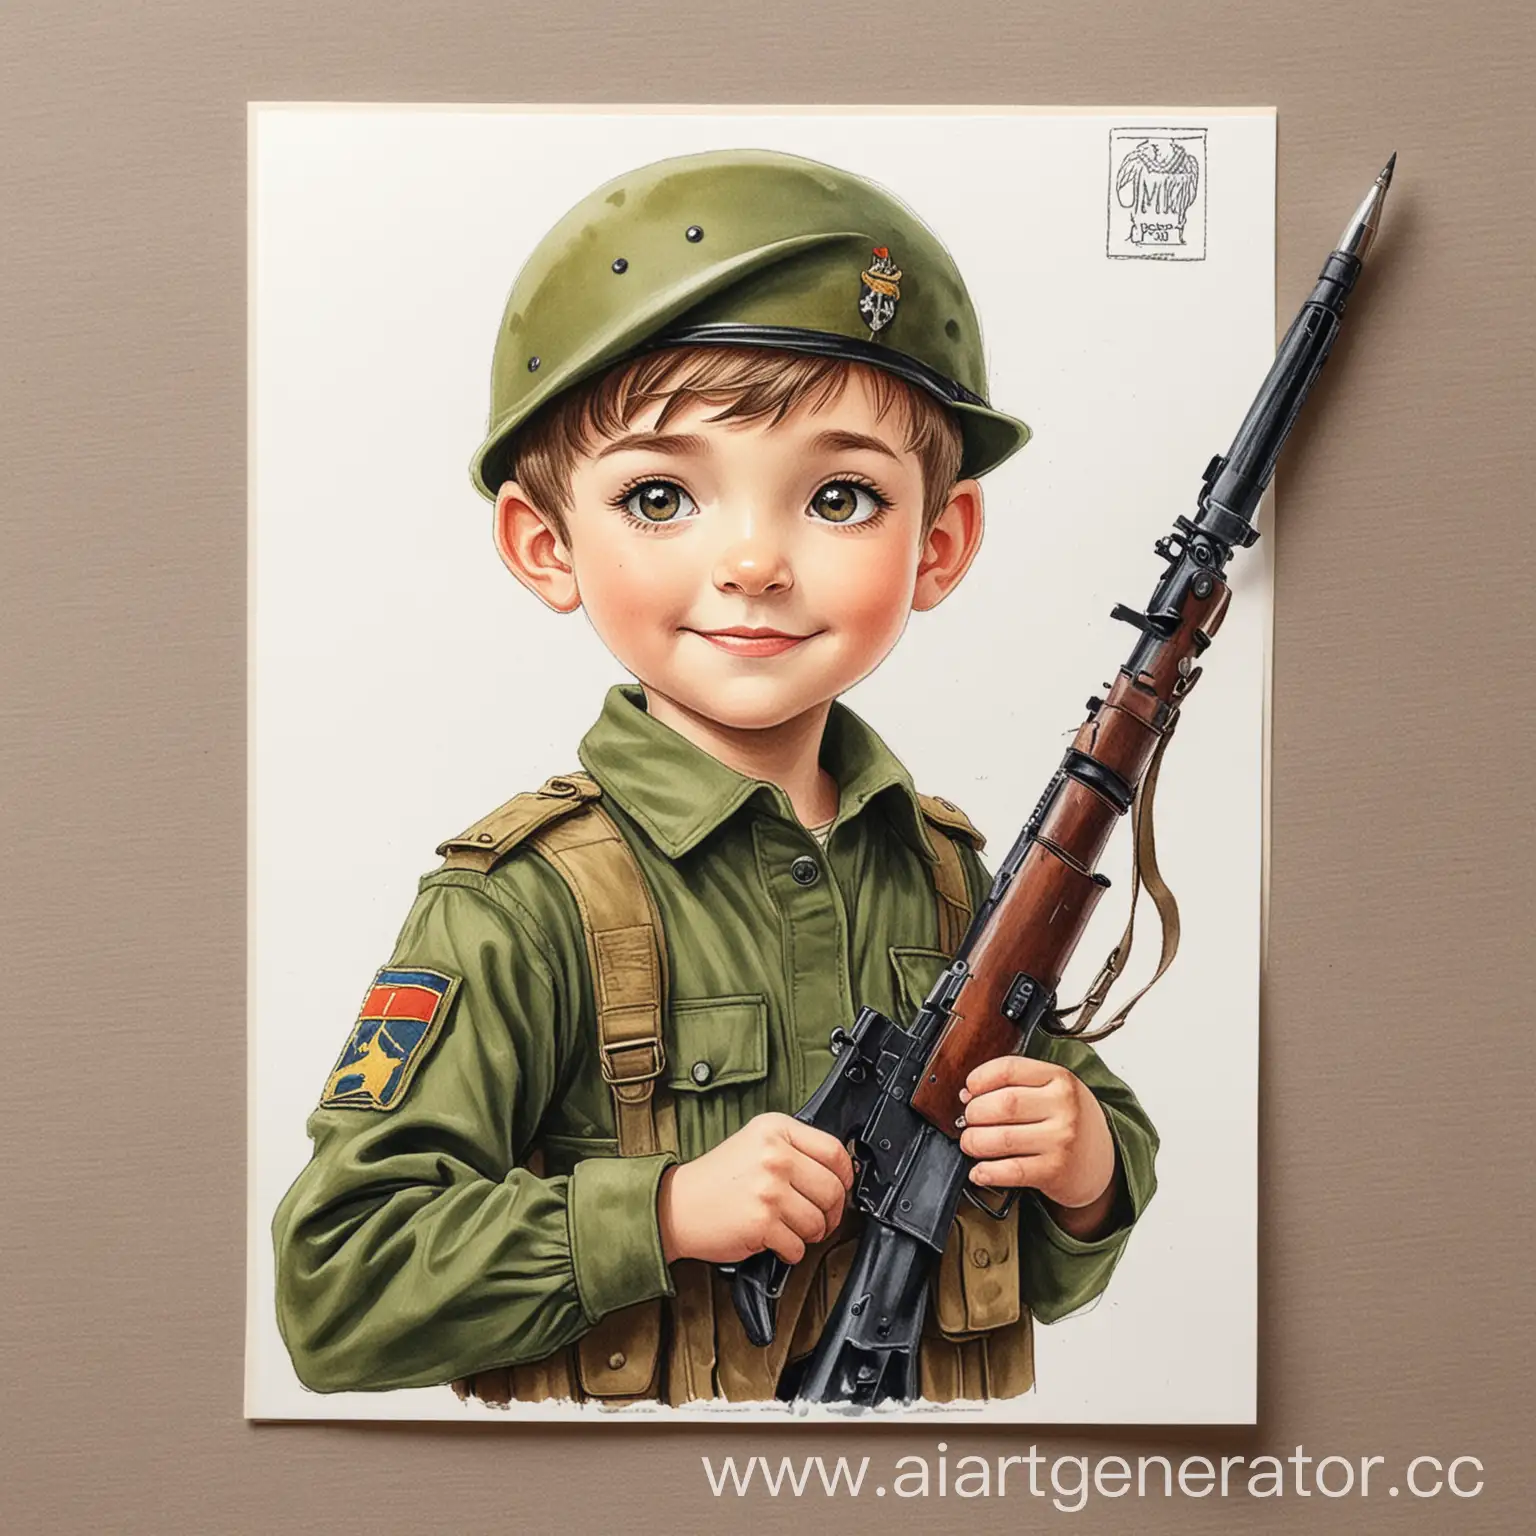 Boy-Soldier-Celebrating-Childrens-Protection-Day-on-a-Postcard